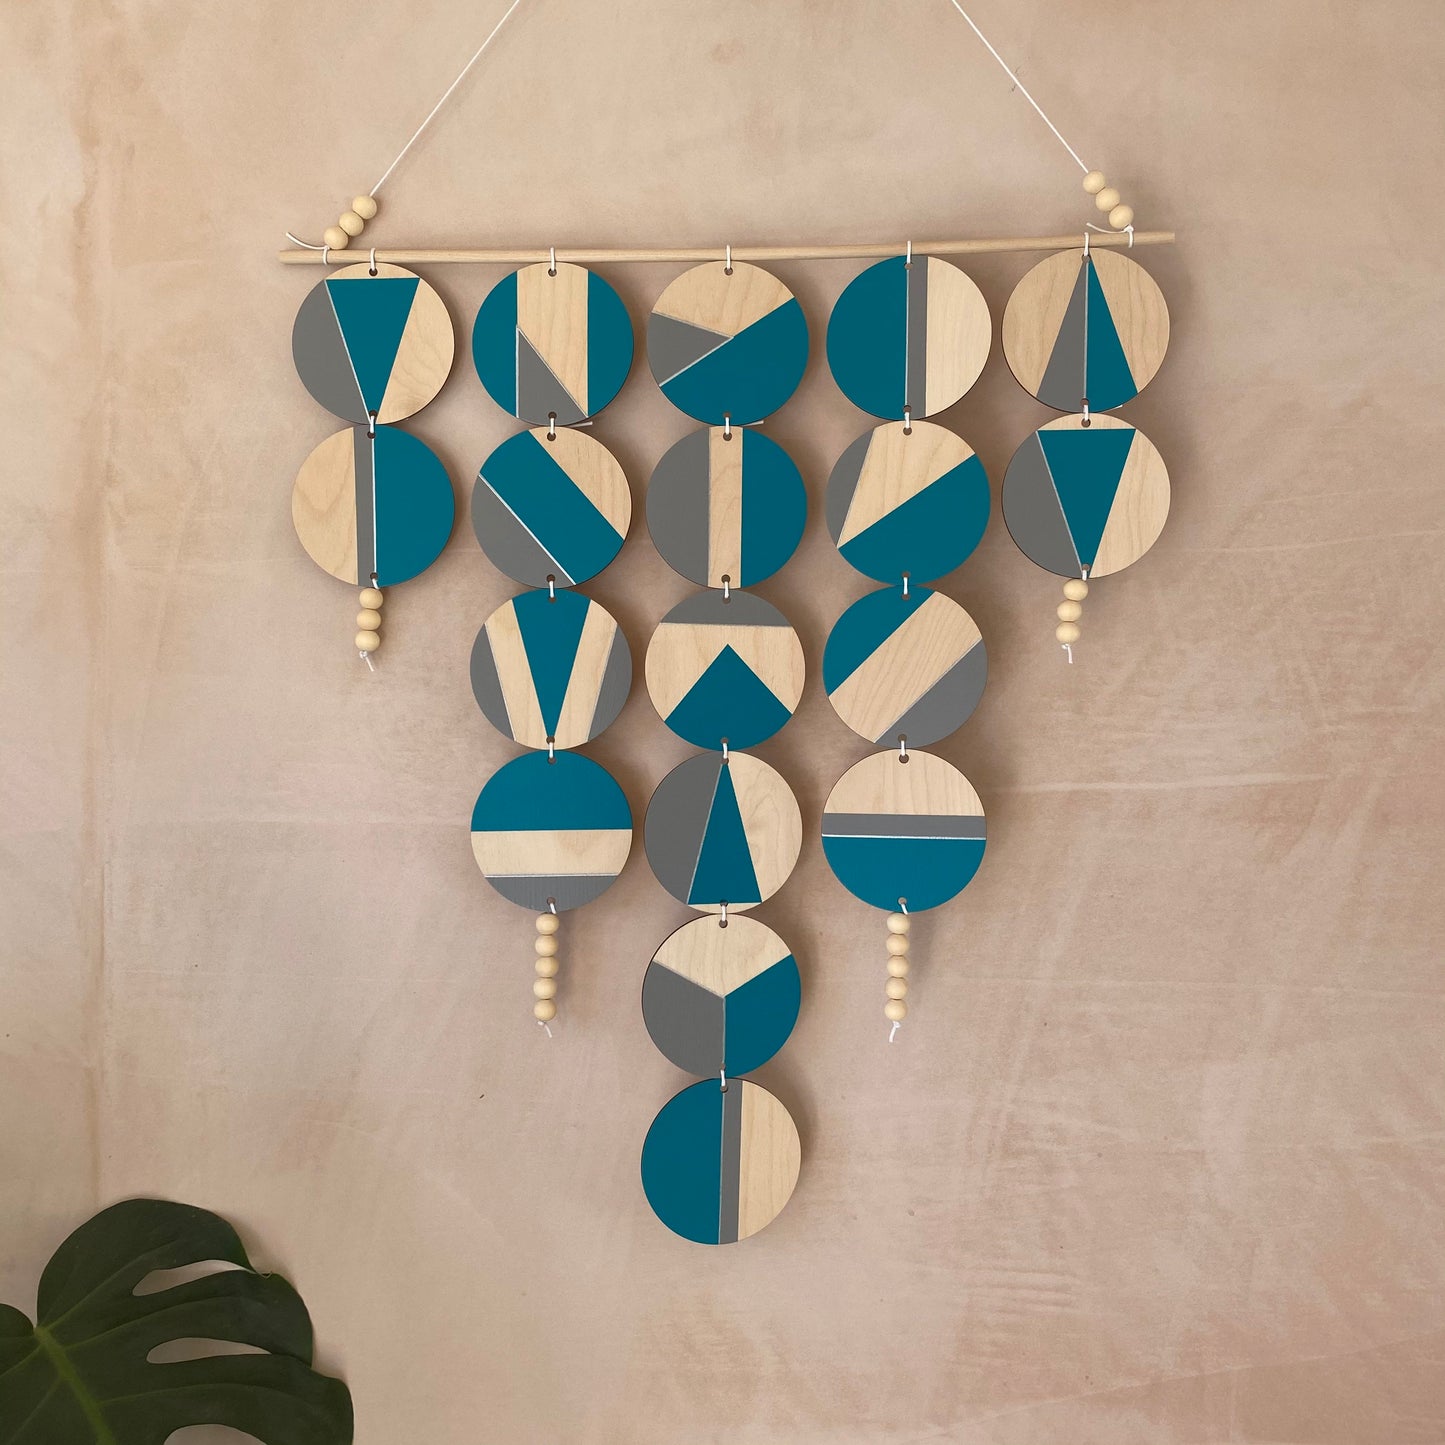 Large Chandelier Wall Hanging - Wall Hanging - Teal and Grey Geometric Art - Teal Wall Decor - Home Wall Decor - Big Wall Covering